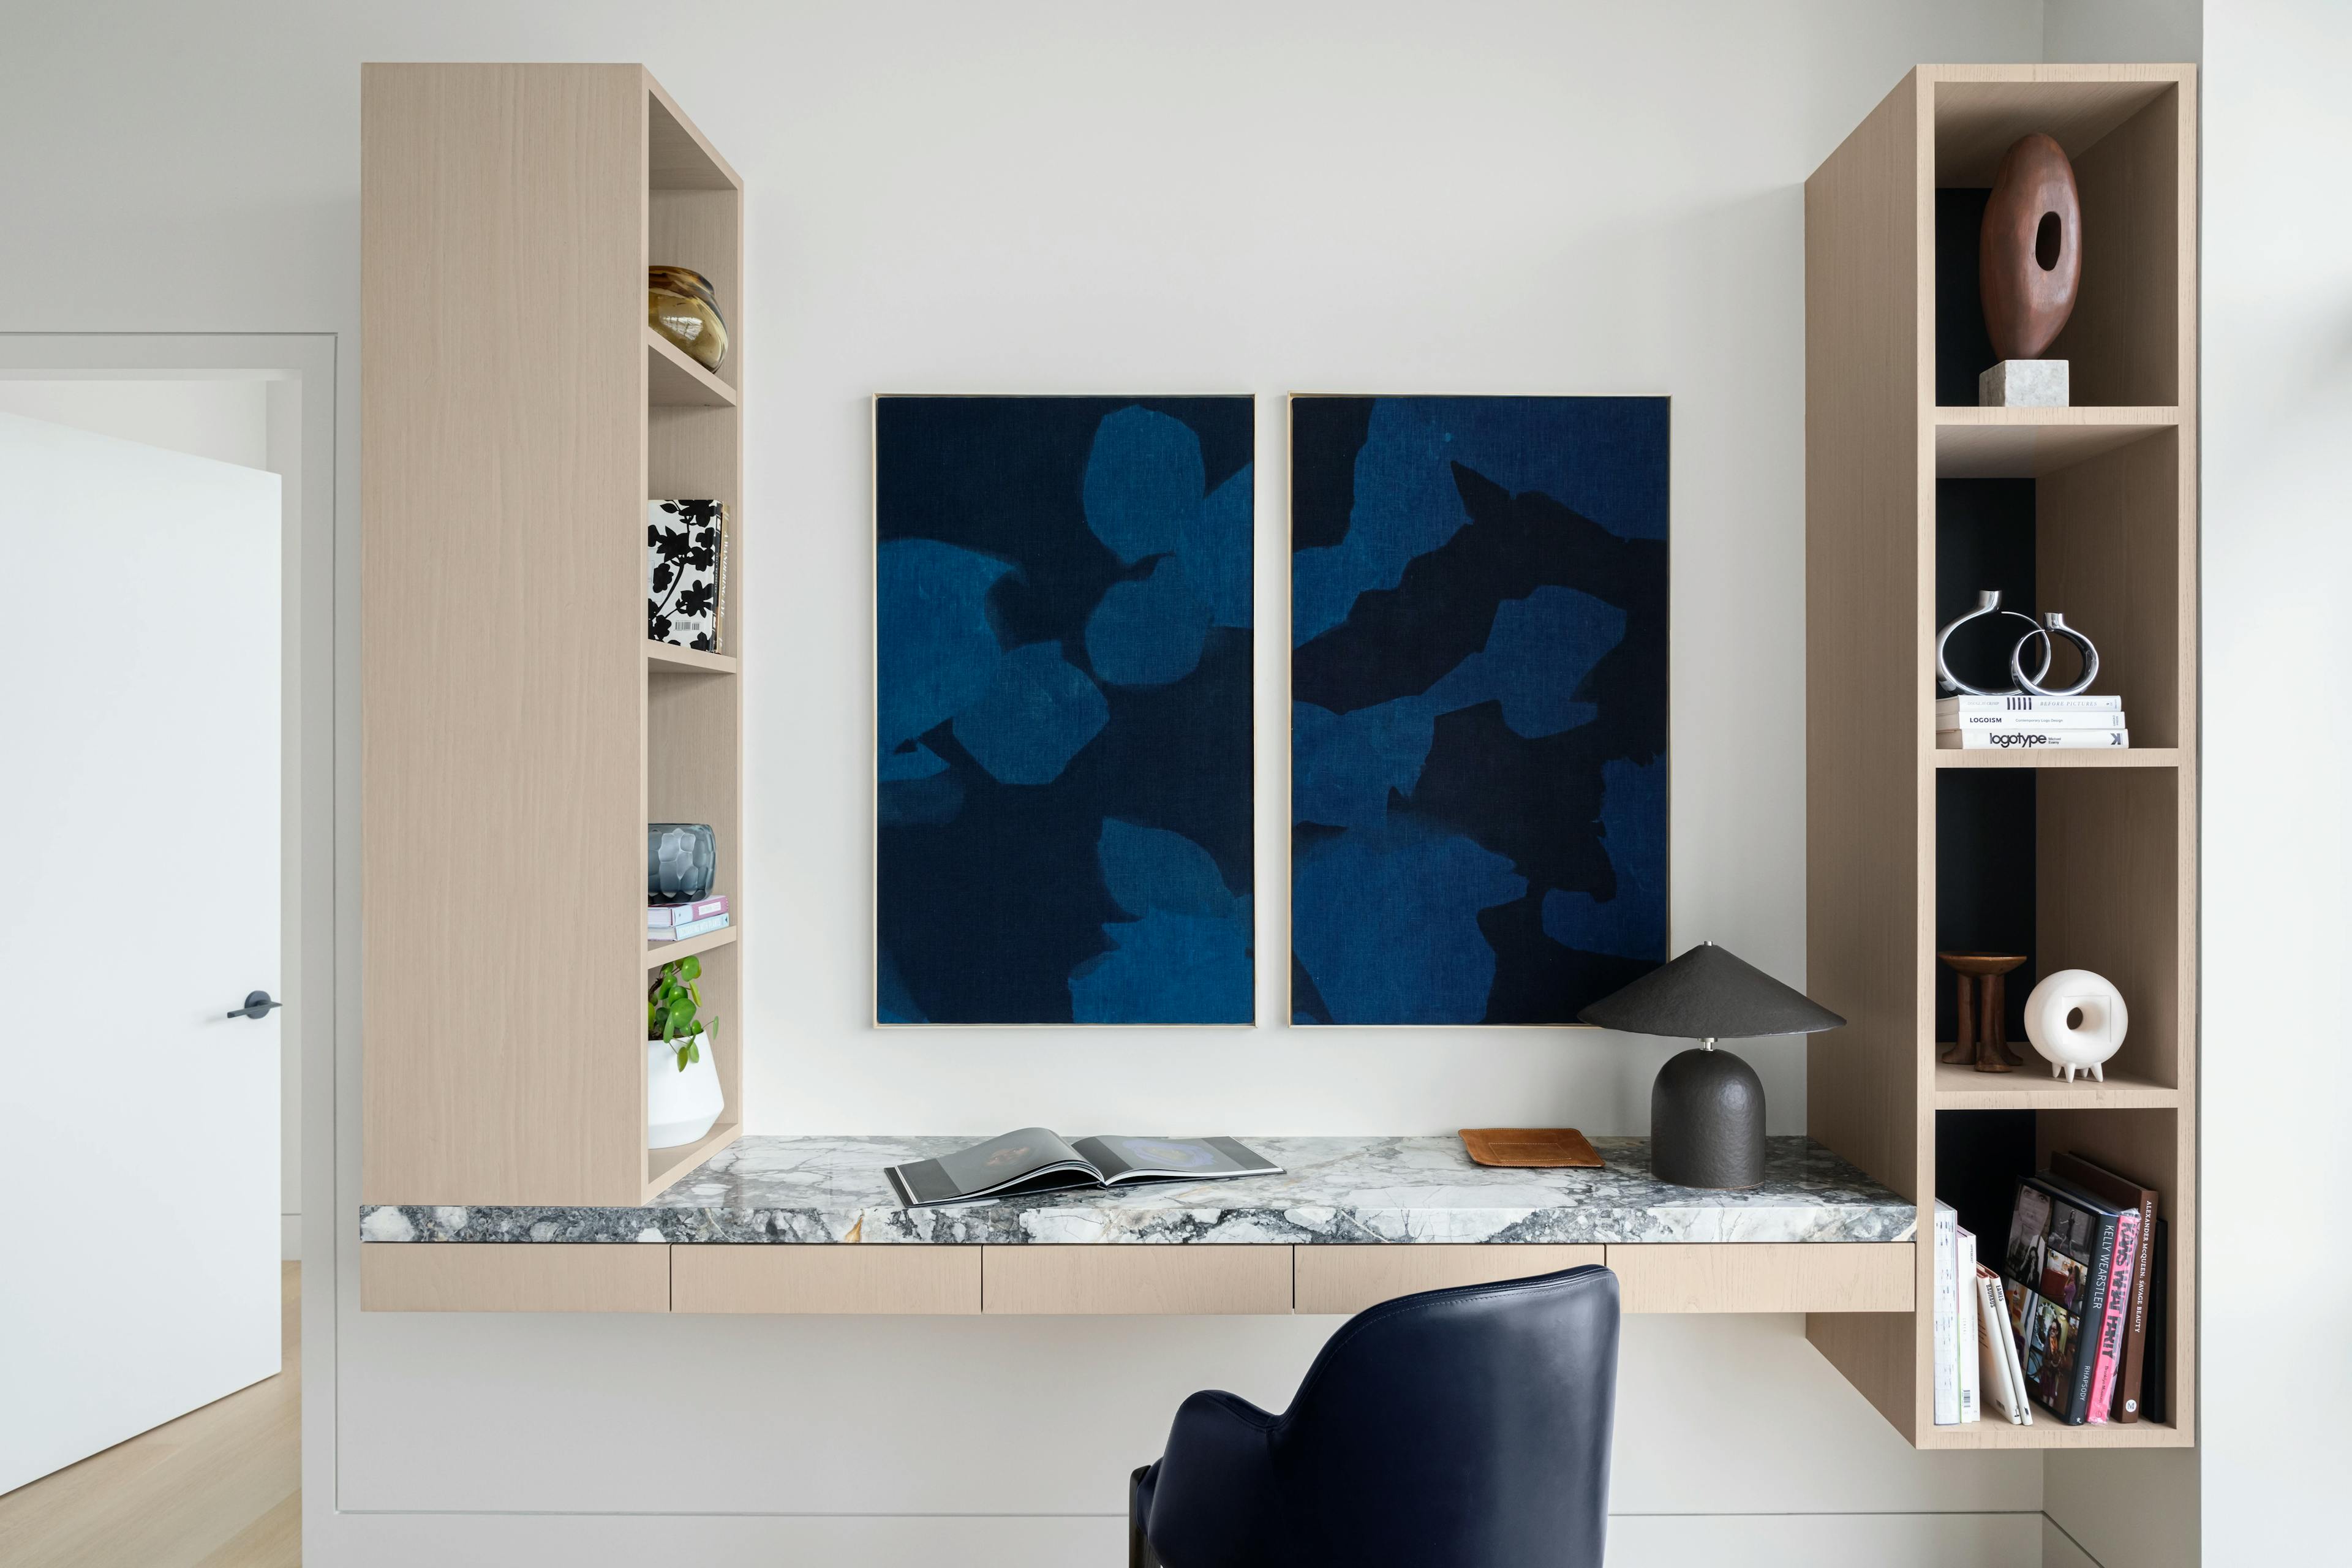 Abstract, blue and black diptych made from organic pigments by artist Carrie Crawford installed above a beige floating desk.